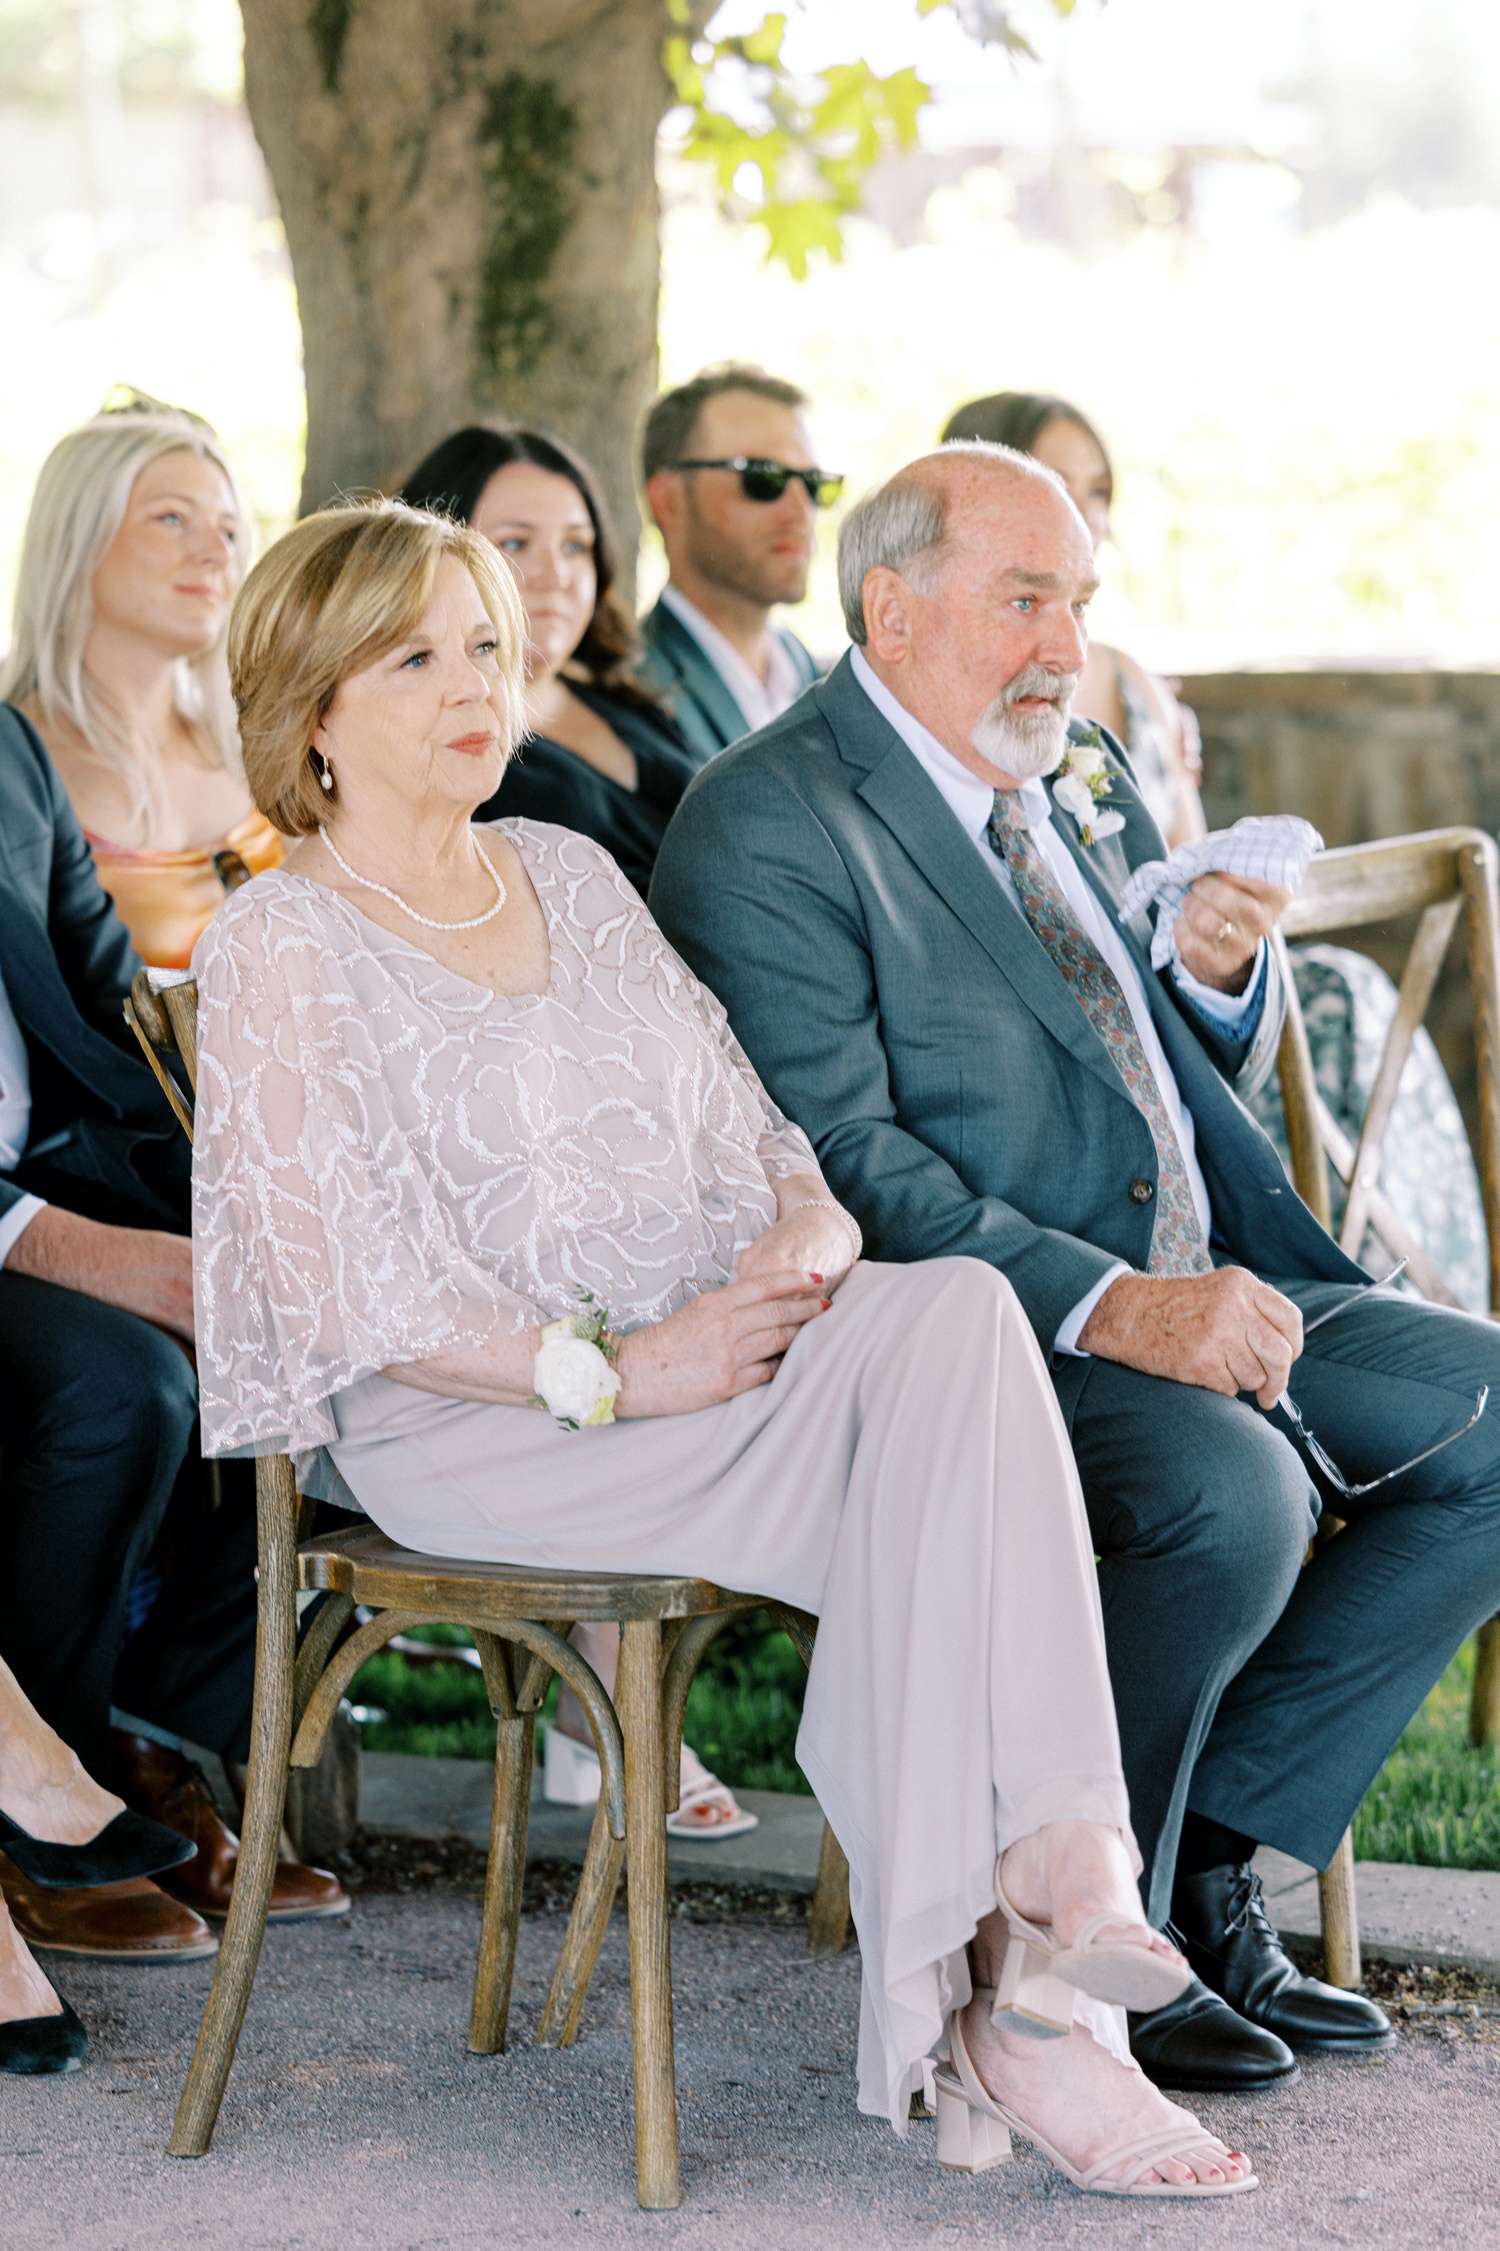 Guests watching wedding ceremony at Abeja Winery